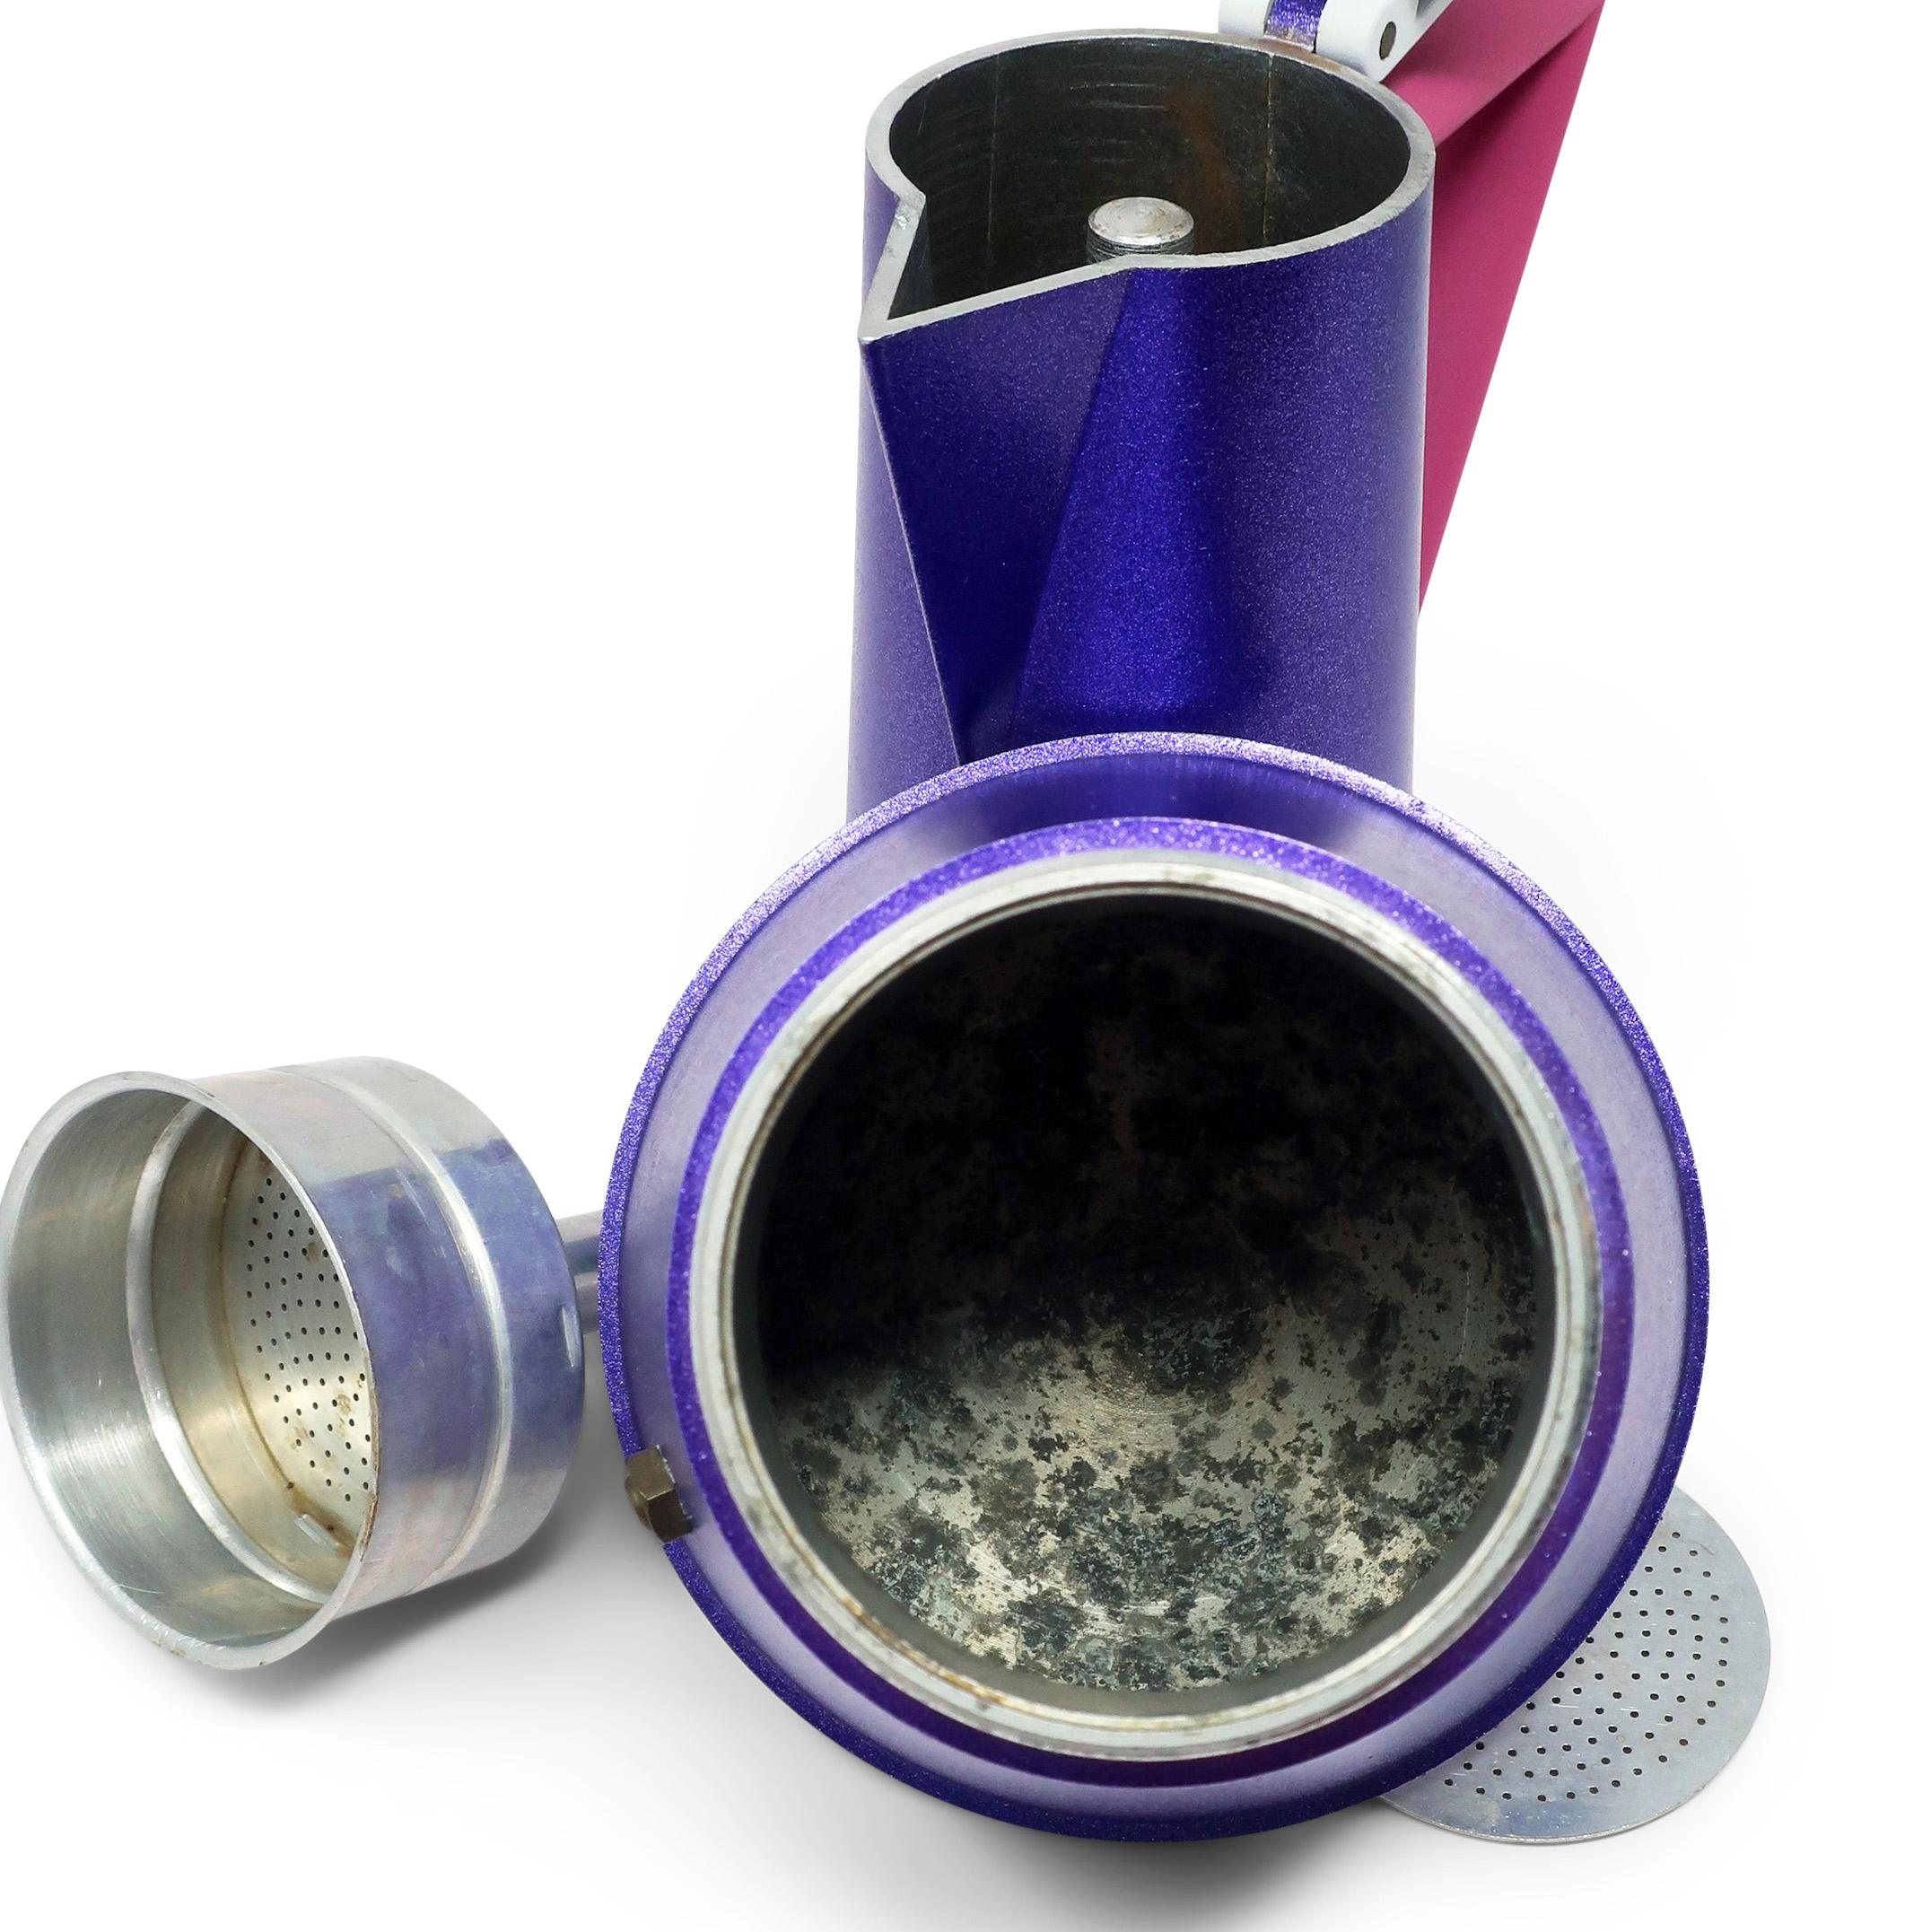 Metal Postmodern Pink and Purple Espresso Pot by Ettore Sottsass for Lagostina